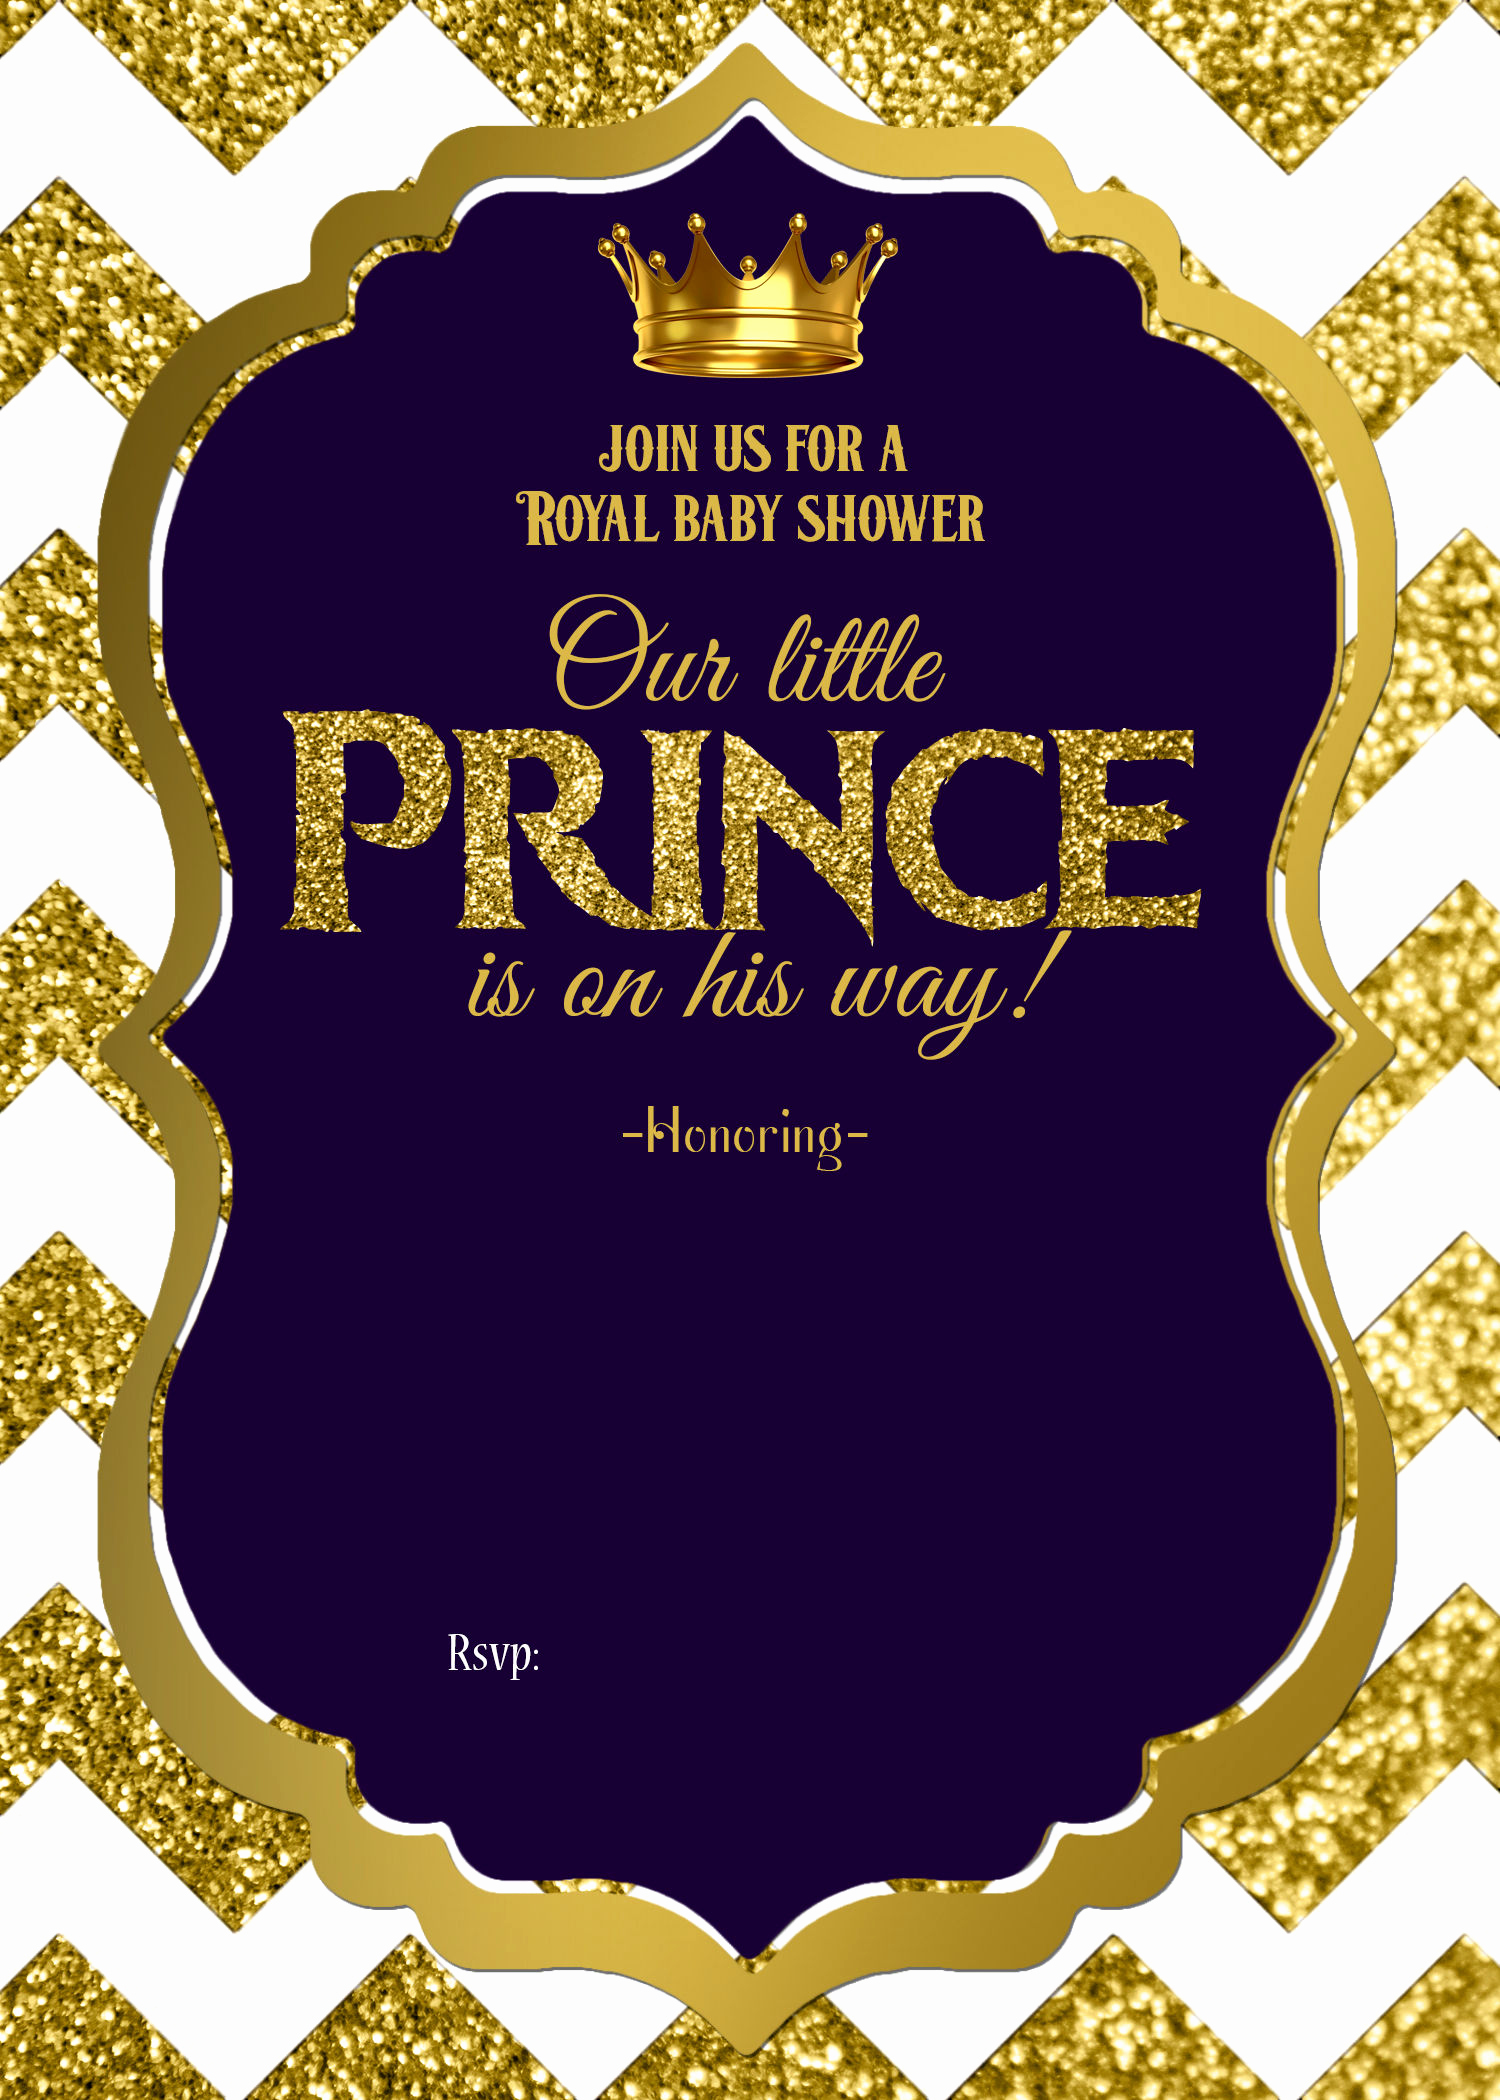 Royal Baby Shower Invitation Templates Lovely Royal Baby Shower Printable Invitations